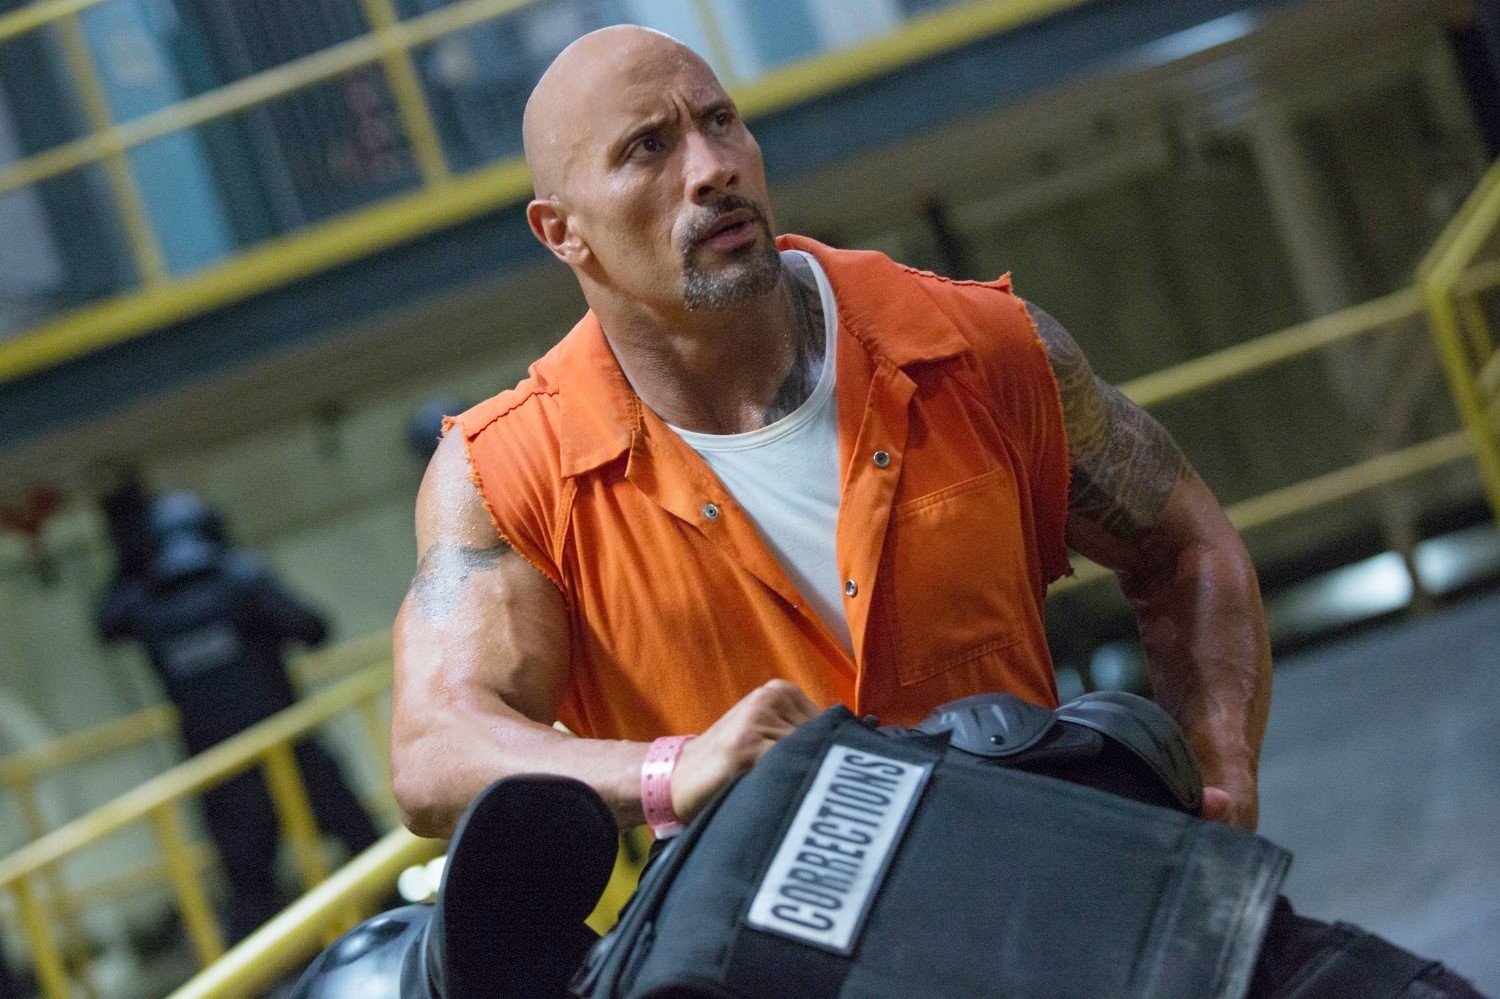 The Rock stars as Hobbs in Universal Pictures' The Fate of the Furious (2017)